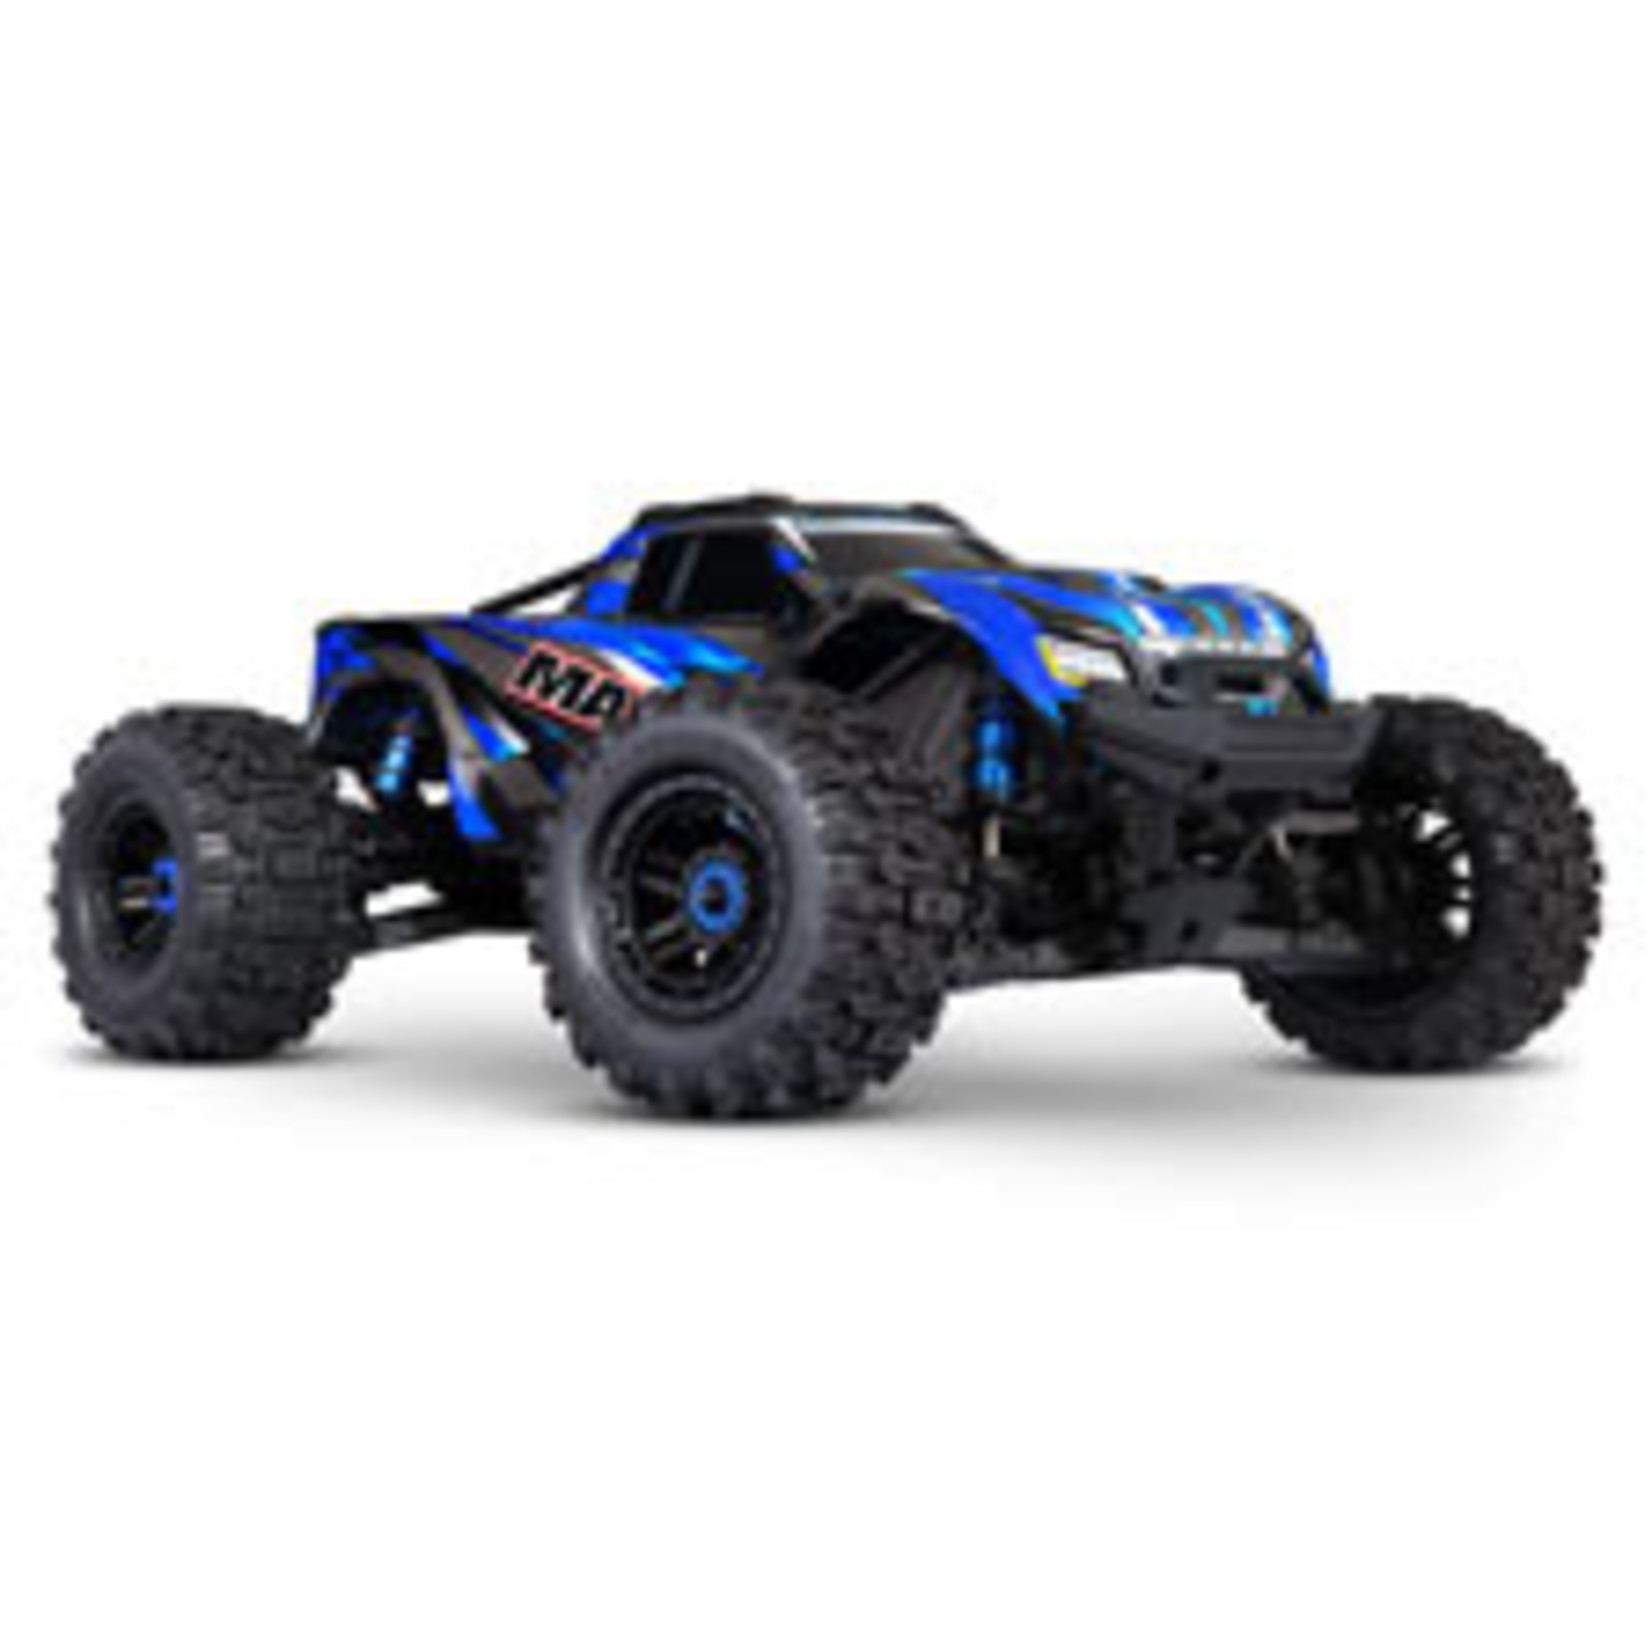 Traxxas 89086-4-BLUE Maxx®: 1/10 Scale 4WD Brushless Electric Monster Truck with TQi™ Traxxas Link™ Enabled 2.4GHz Radio System & Traxxas Stability Management (TSM)®